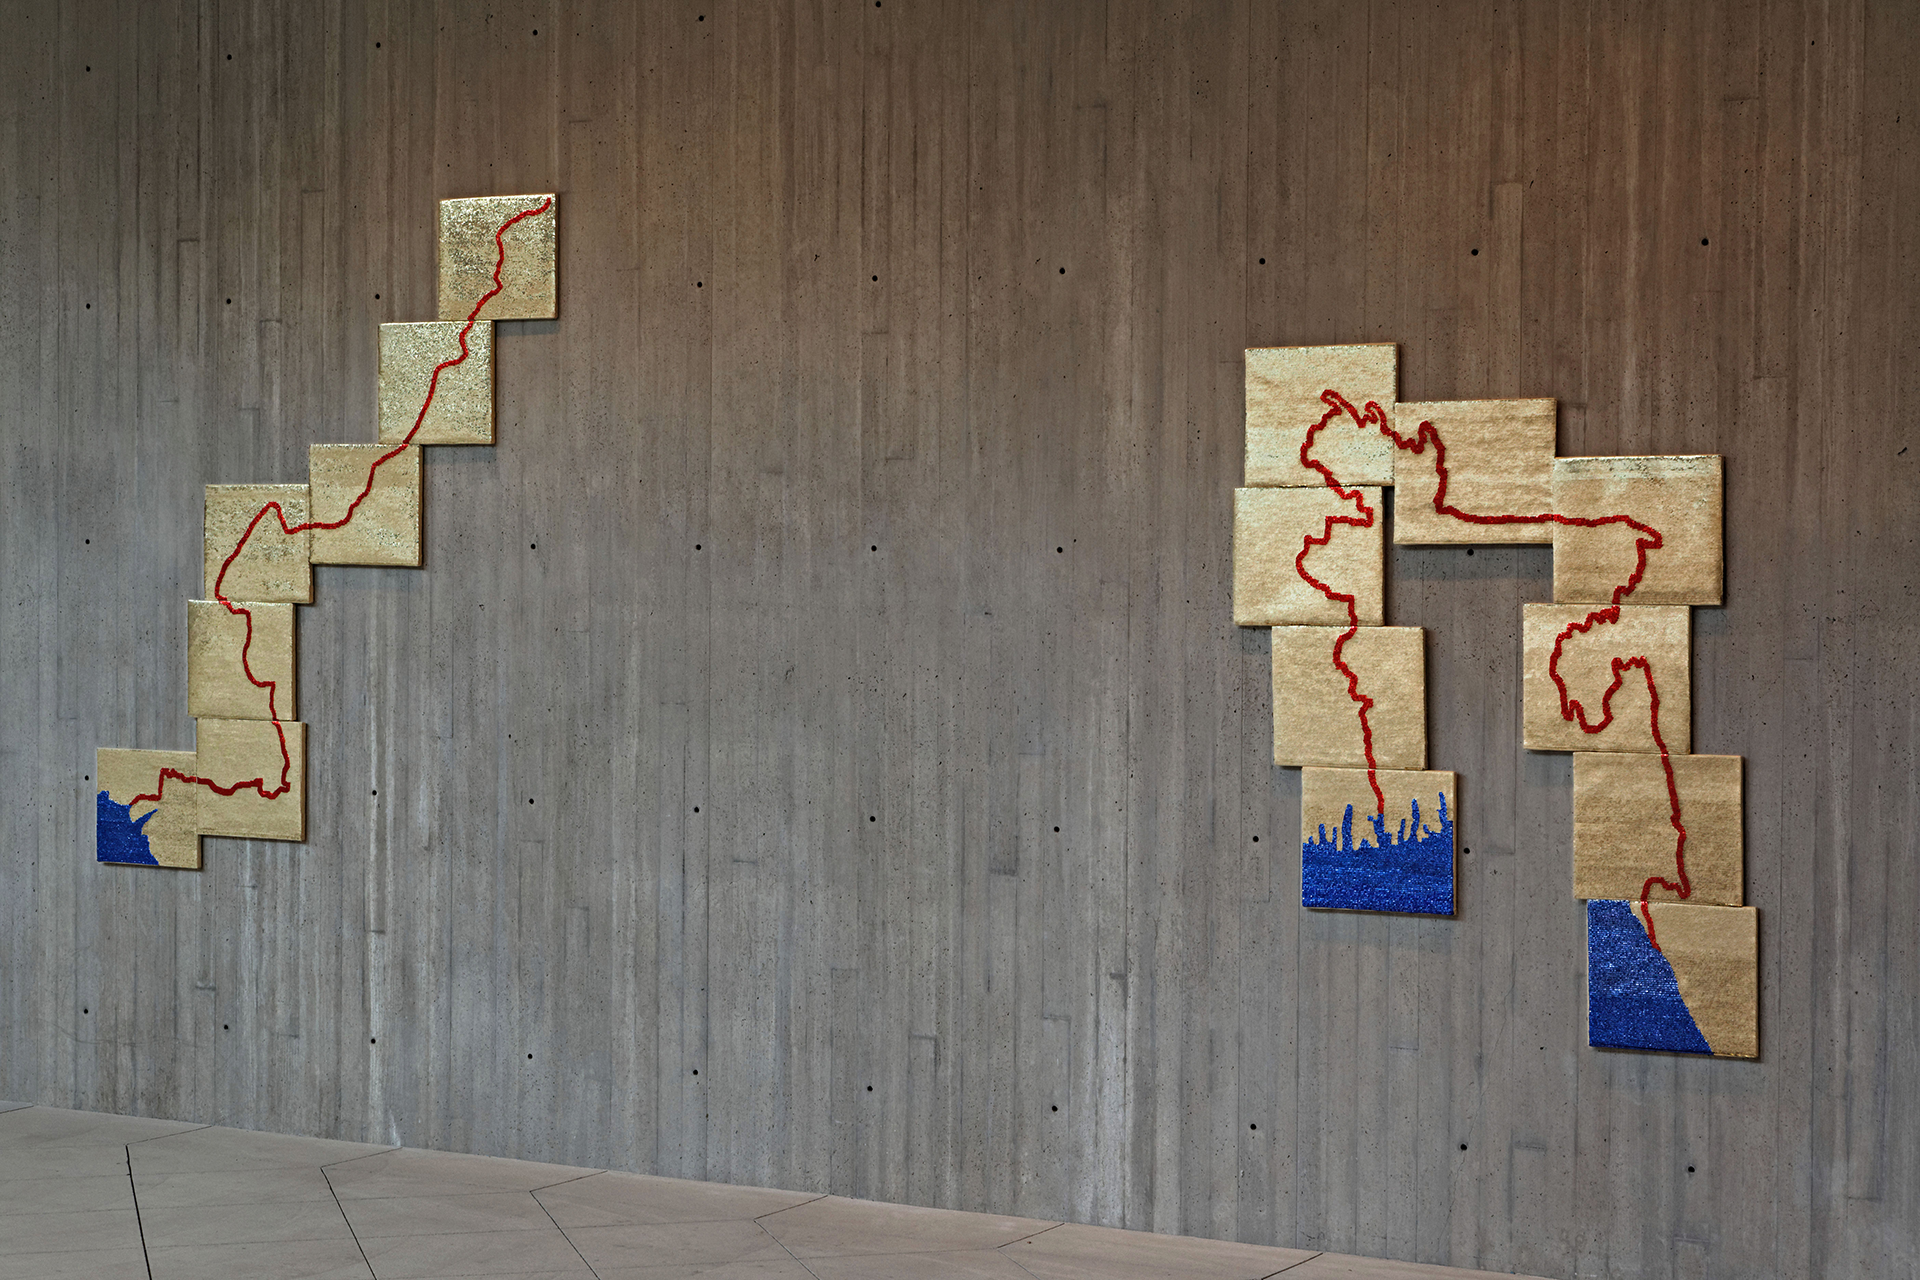 Art gallery display of gold squares connected by a red line.